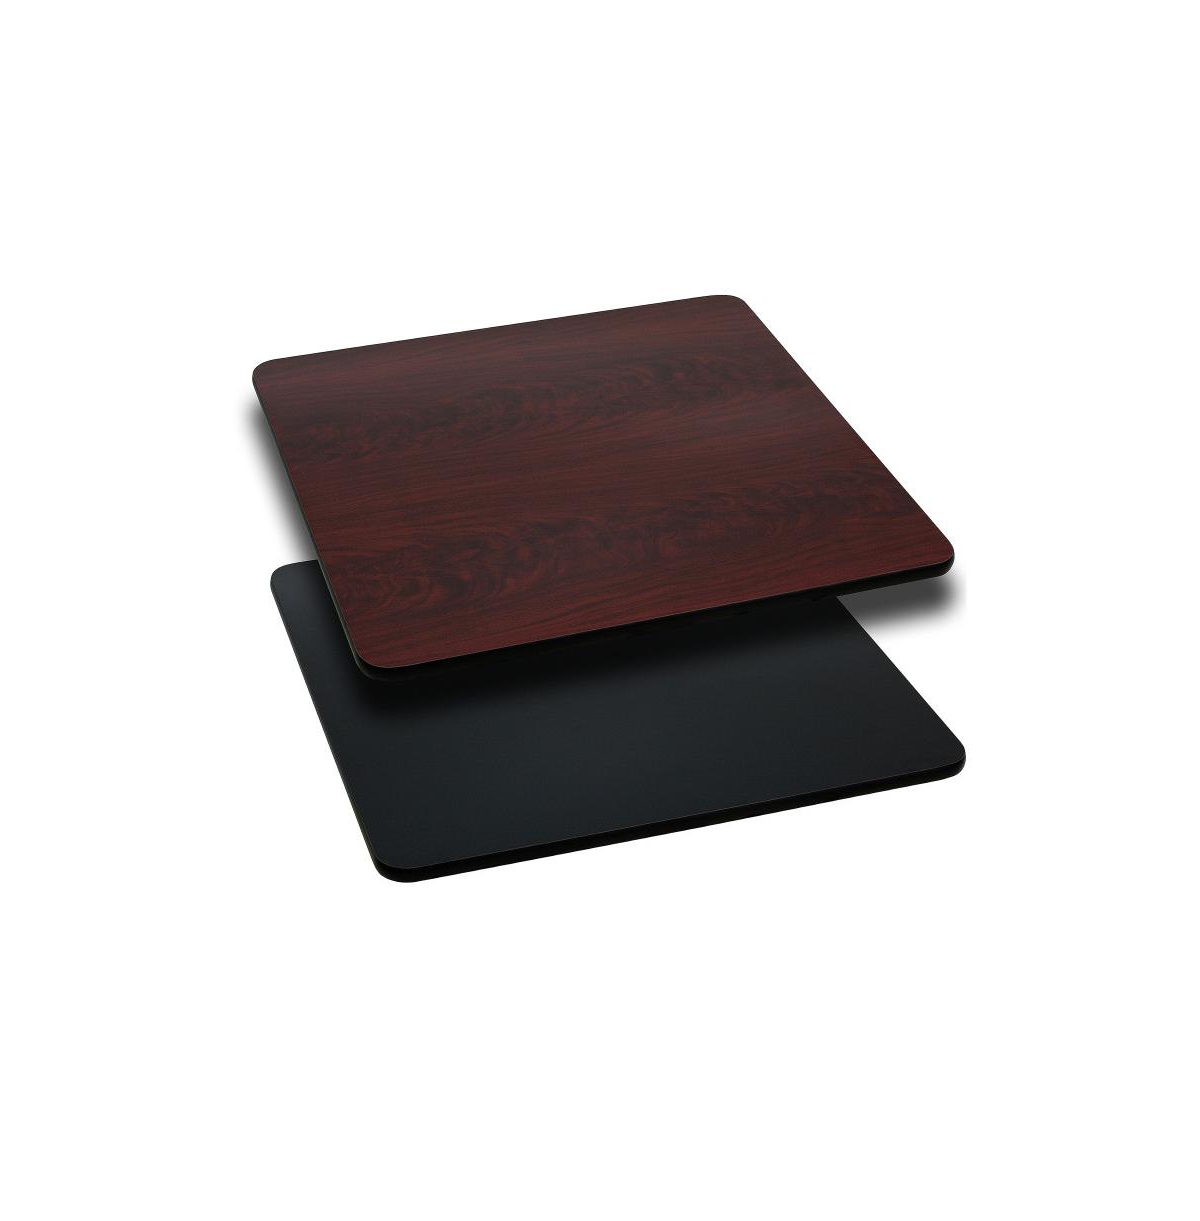 Emma+oliver 24" Square Table Top With Reversible Laminate Top In Black,mahogany